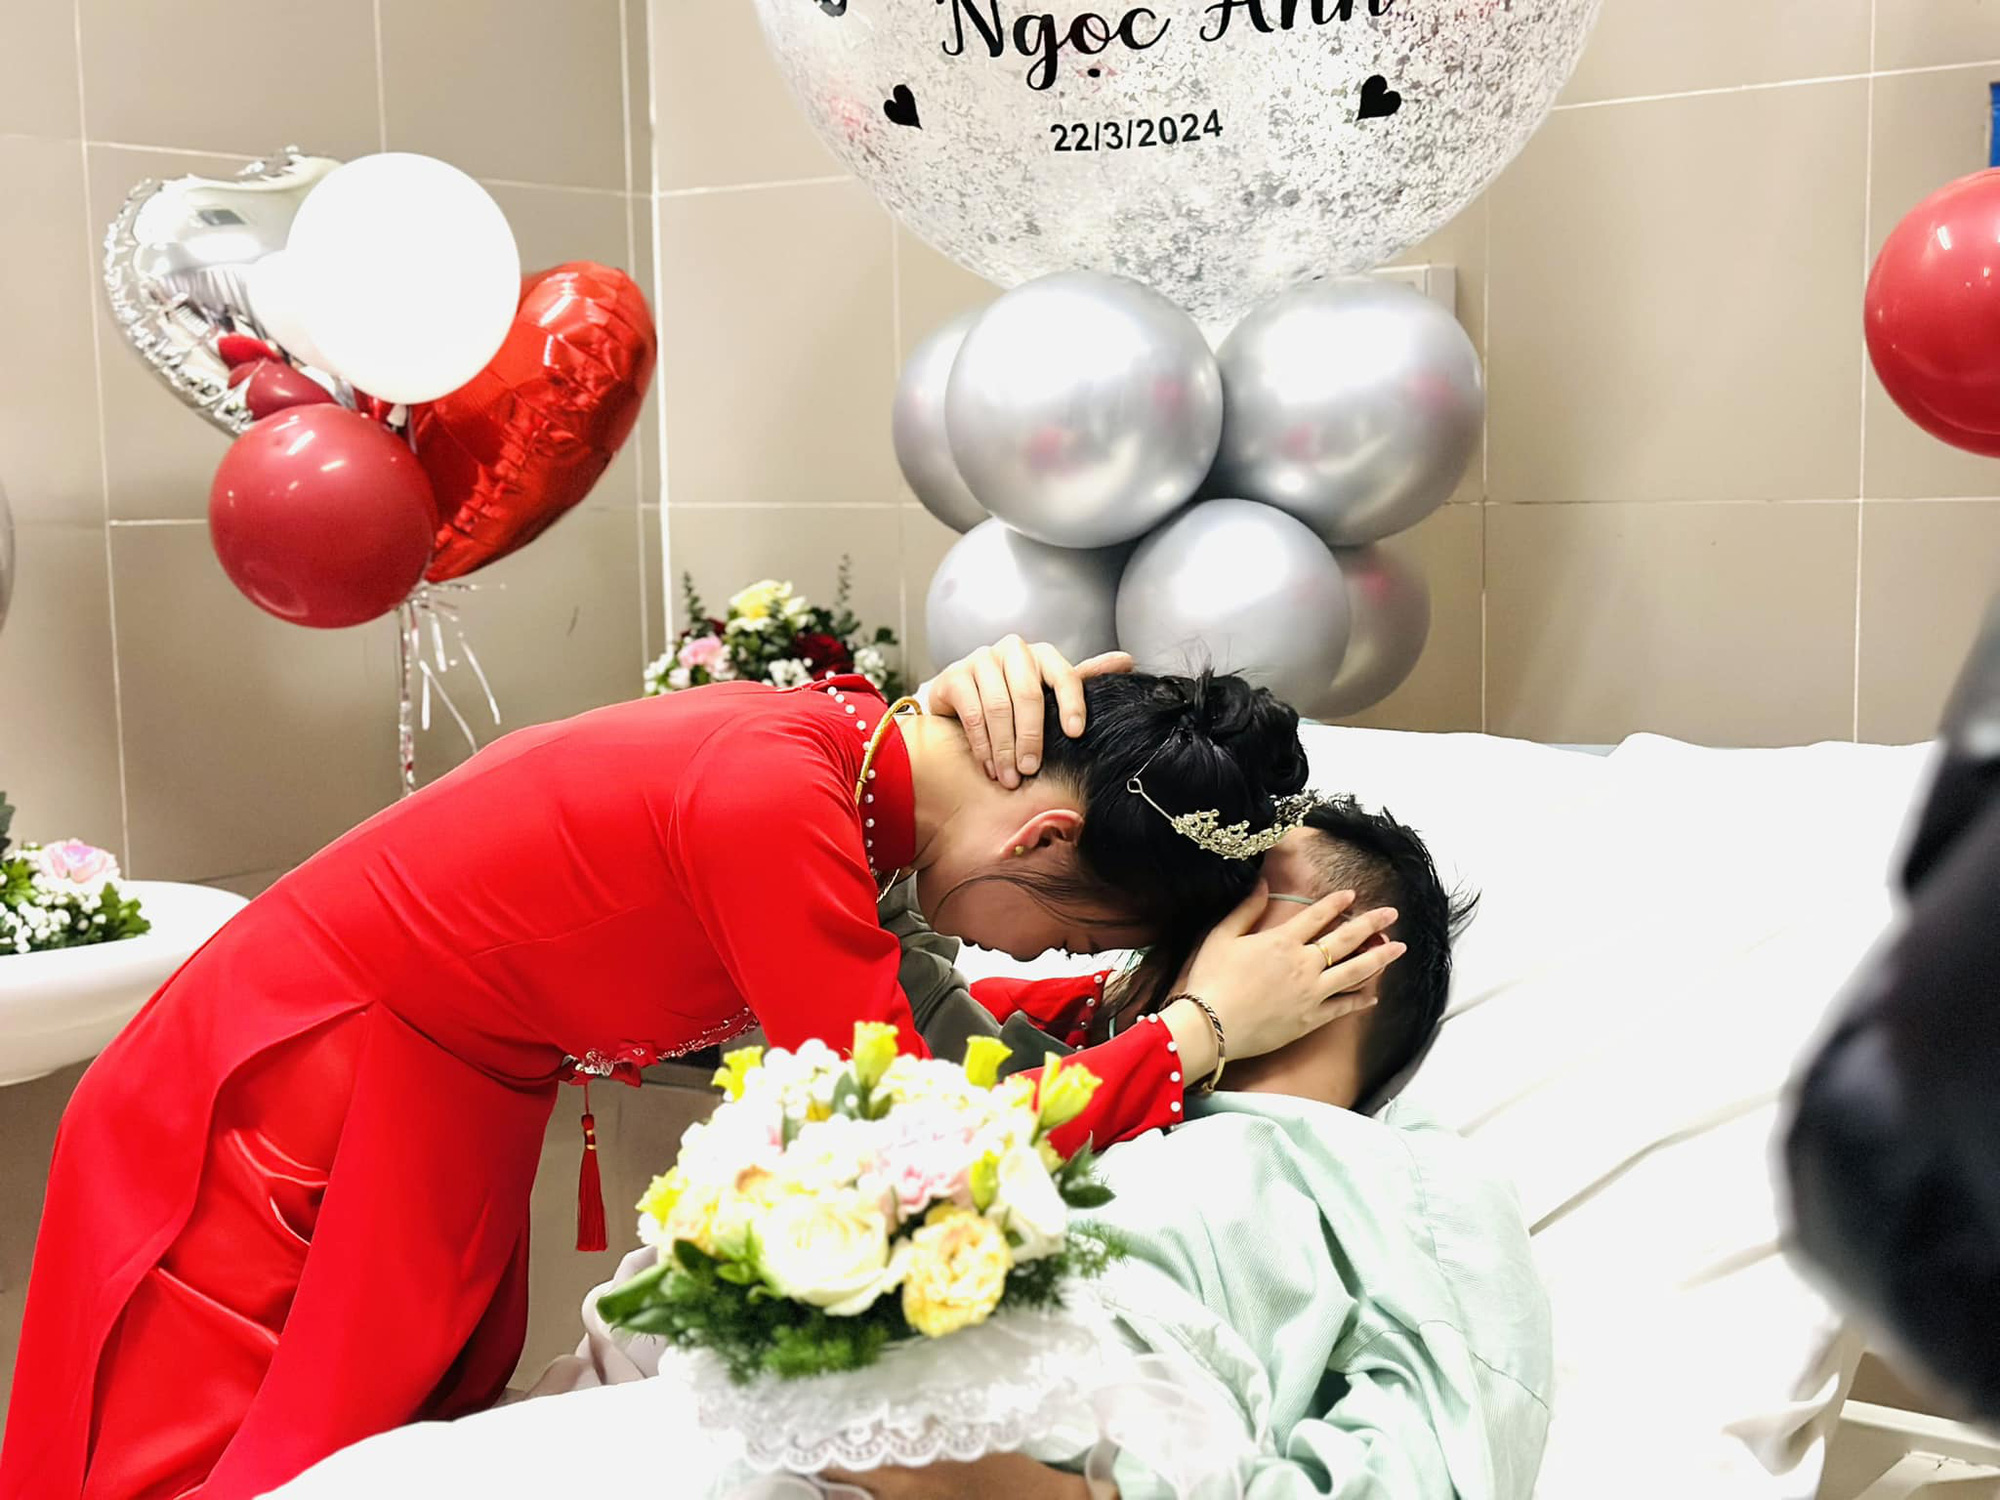 Love wins all: Couple gets married by hospital bed after triumph over illness in northern Vietnam